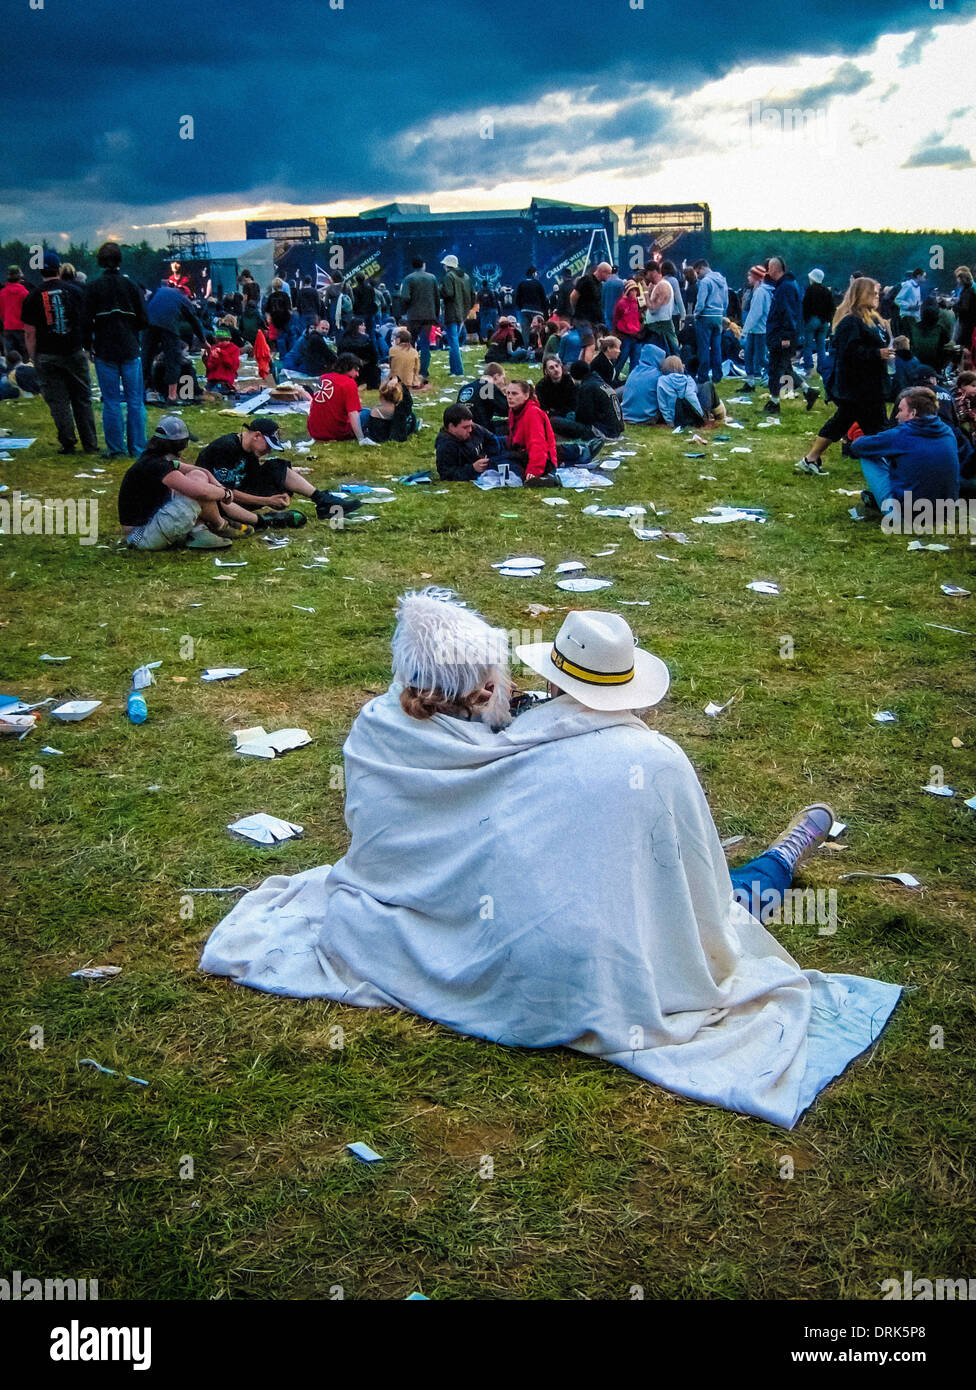 Couple wrapped in blanket, watching a performance, keeping warm at a music festival. UK Stock Photo